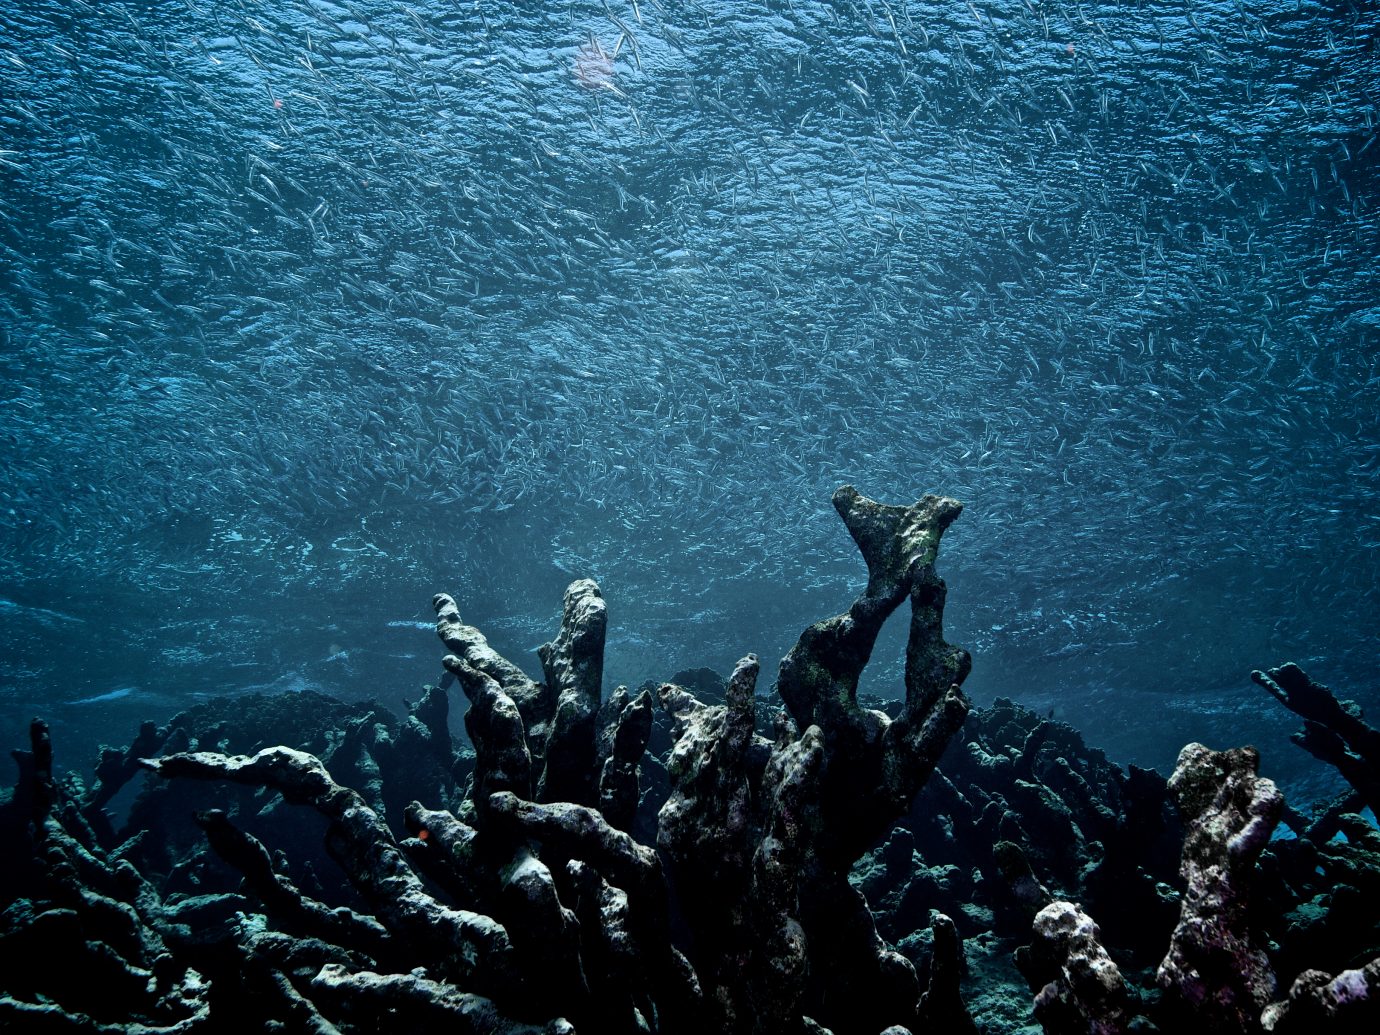 A school of fish swims over a field of dead coral, Los Roques National Park, Venezuela